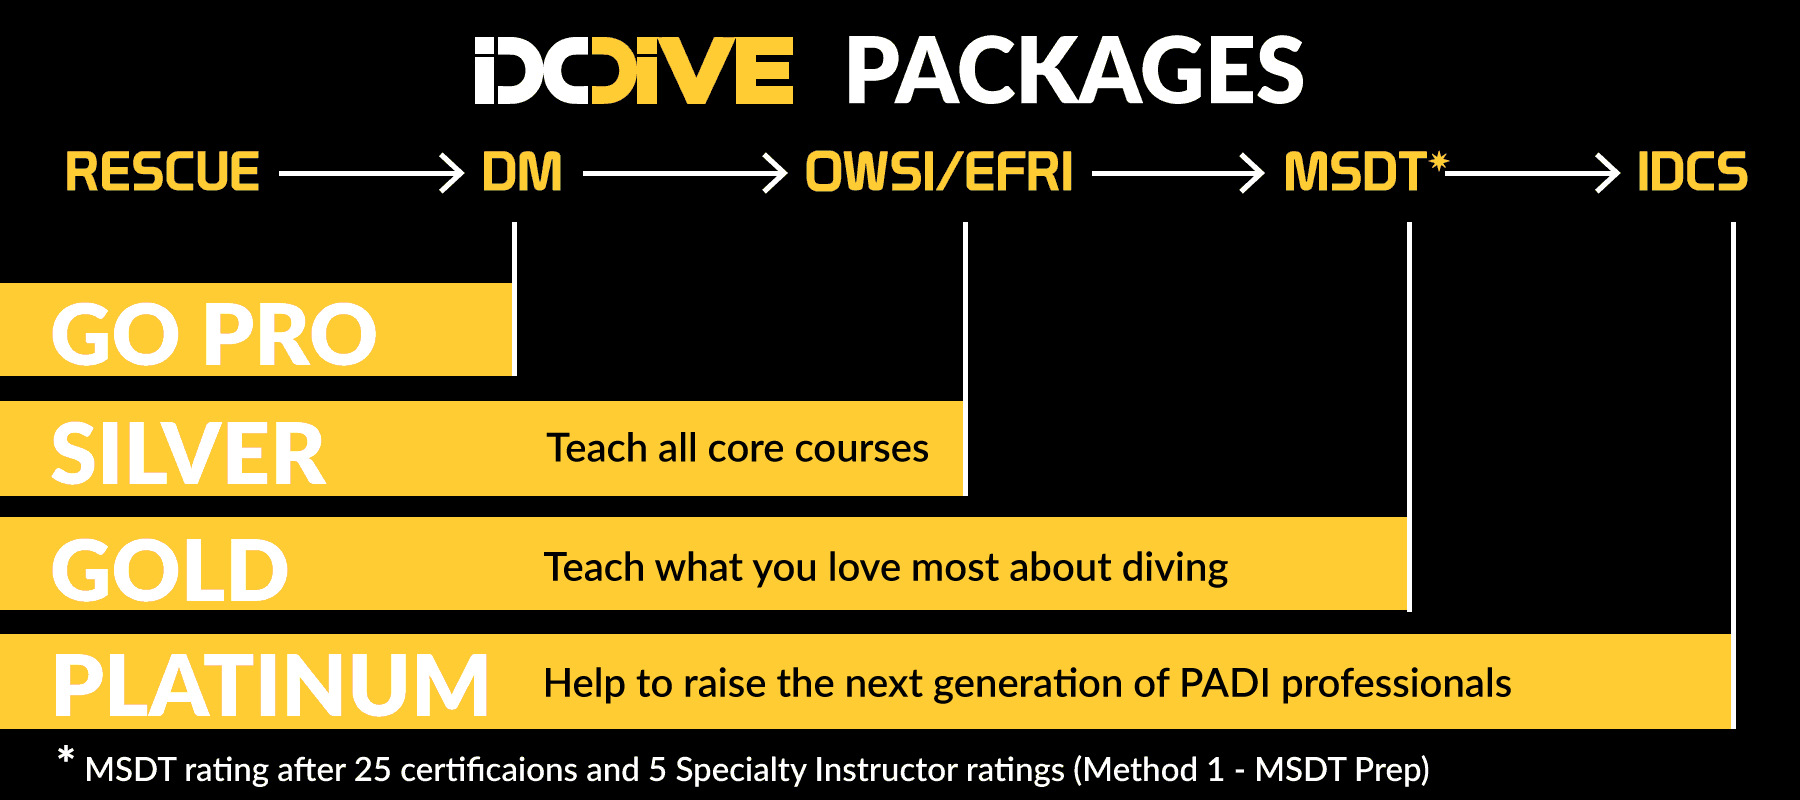 IDC DIVE packages for PADI professional courses in Dahab